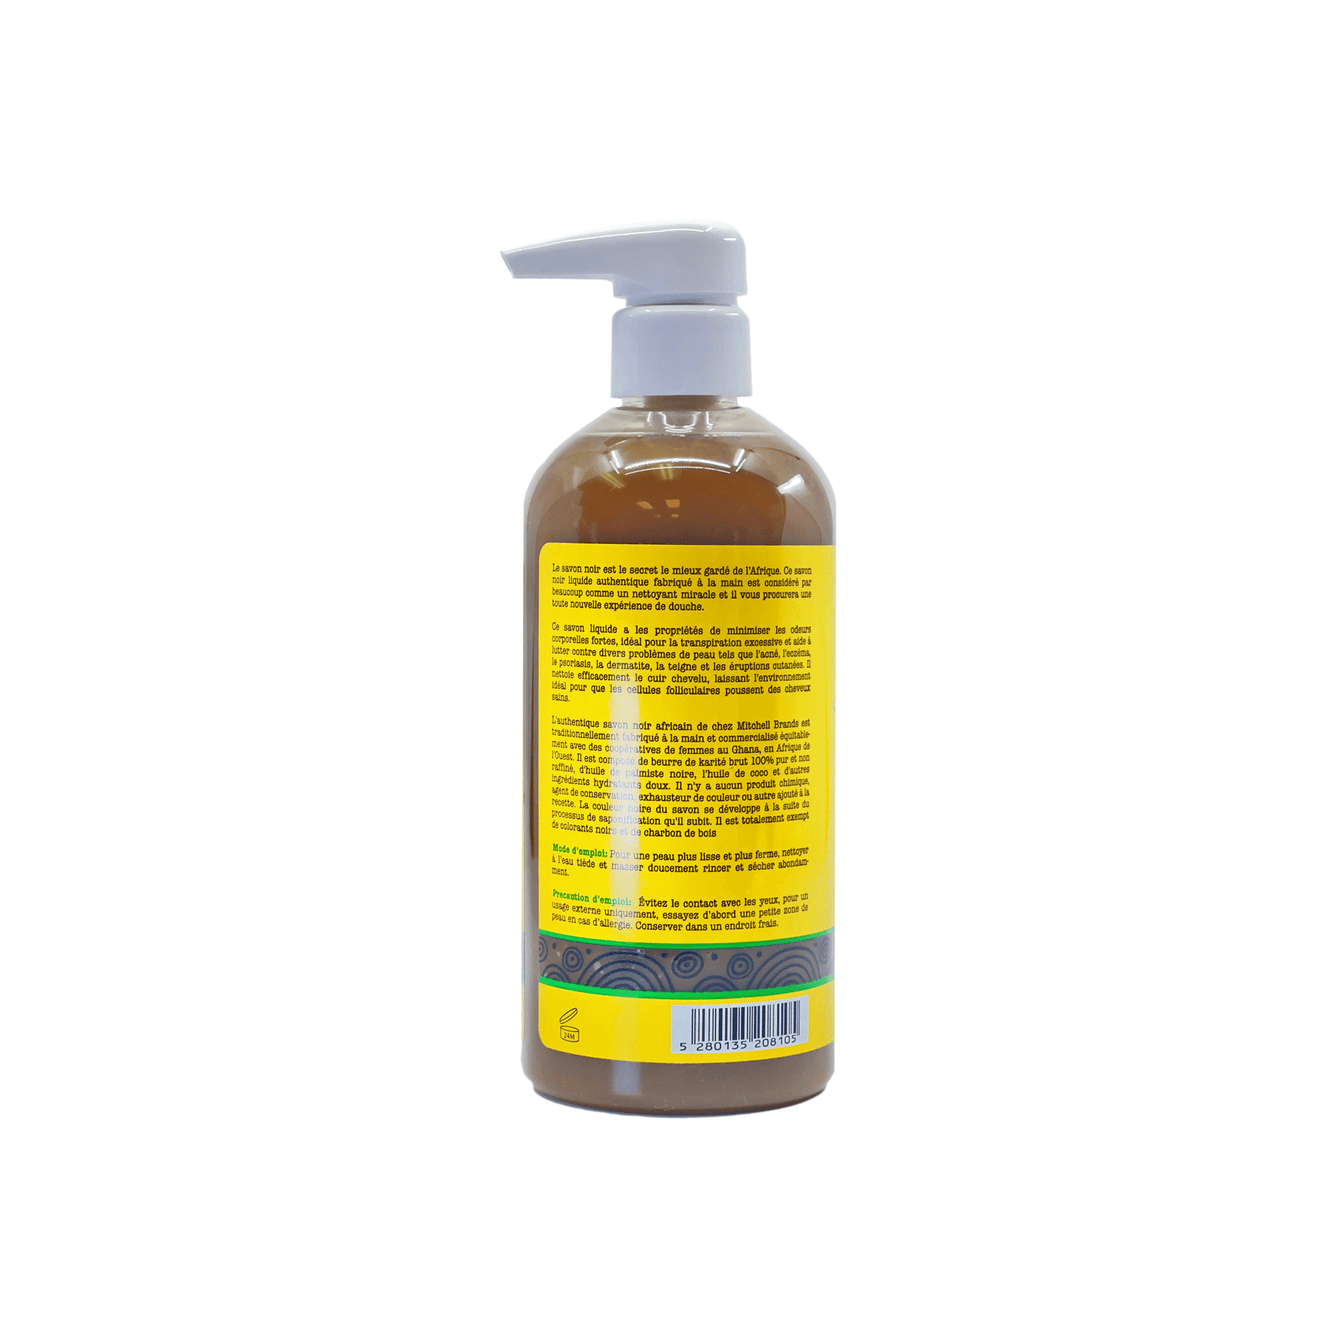 African Liquid Black Soap with Coconut 500 ml (New) Mitchell Brands - Mitchell Brands - Skin Lightening, Skin Brightening, Fade Dark Spots, Shea Butter, Hair Growth Products